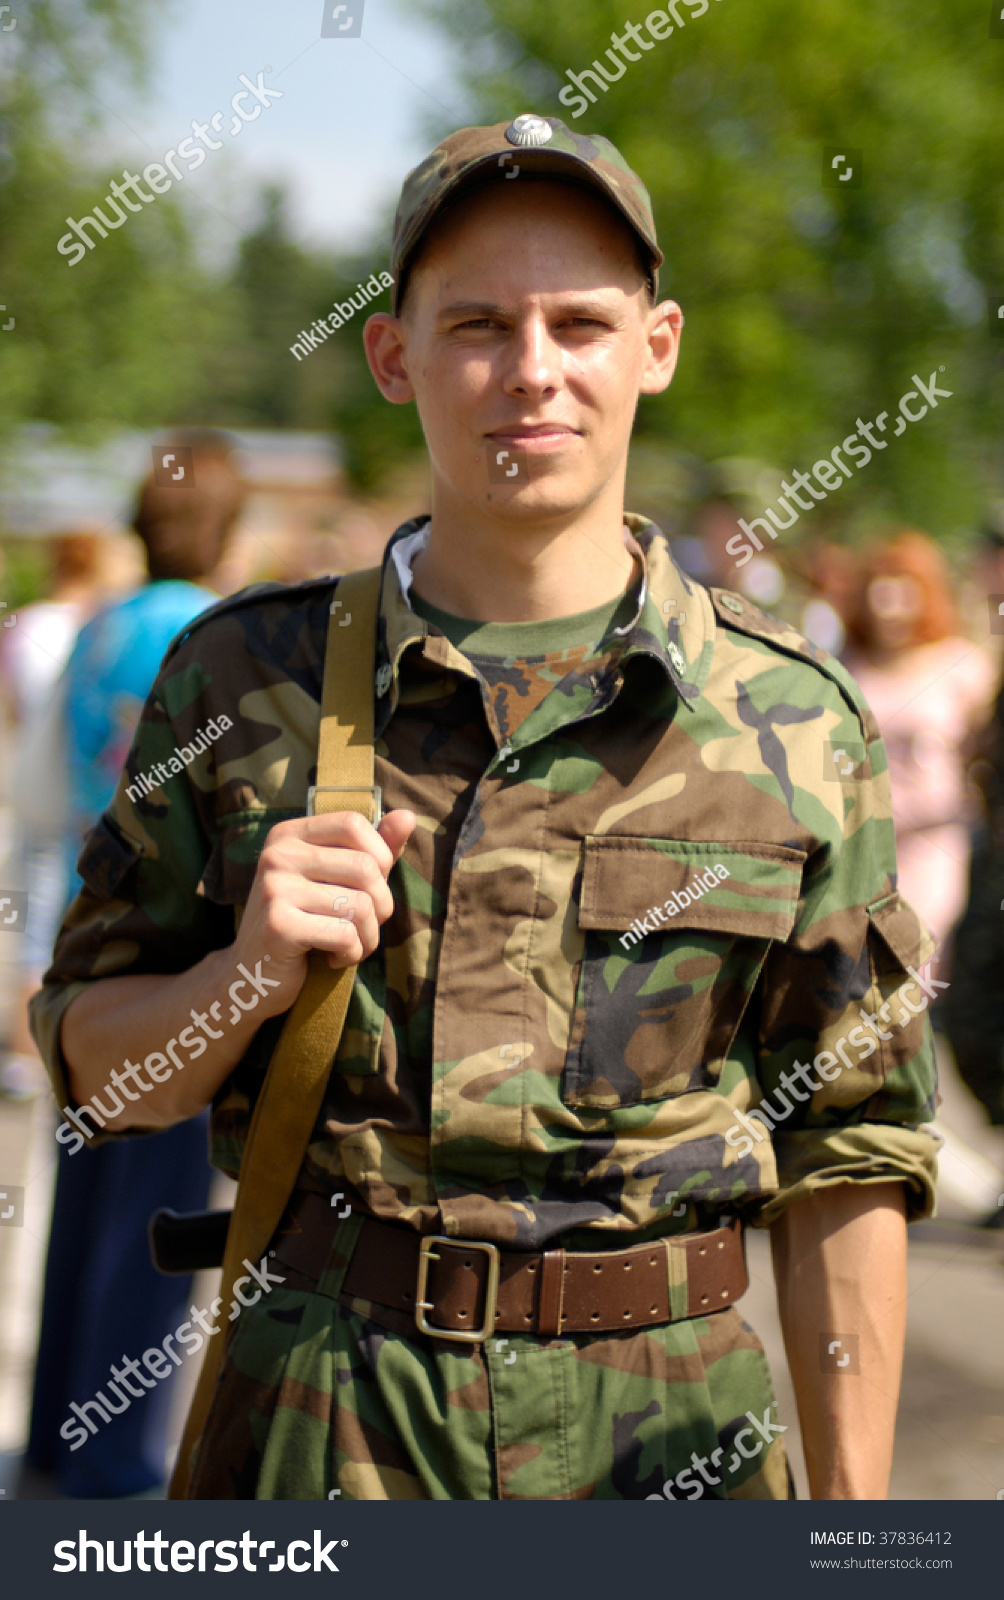 Young Soldier Poses With Some Civilians In The Blurred Out-Of-Focus ...